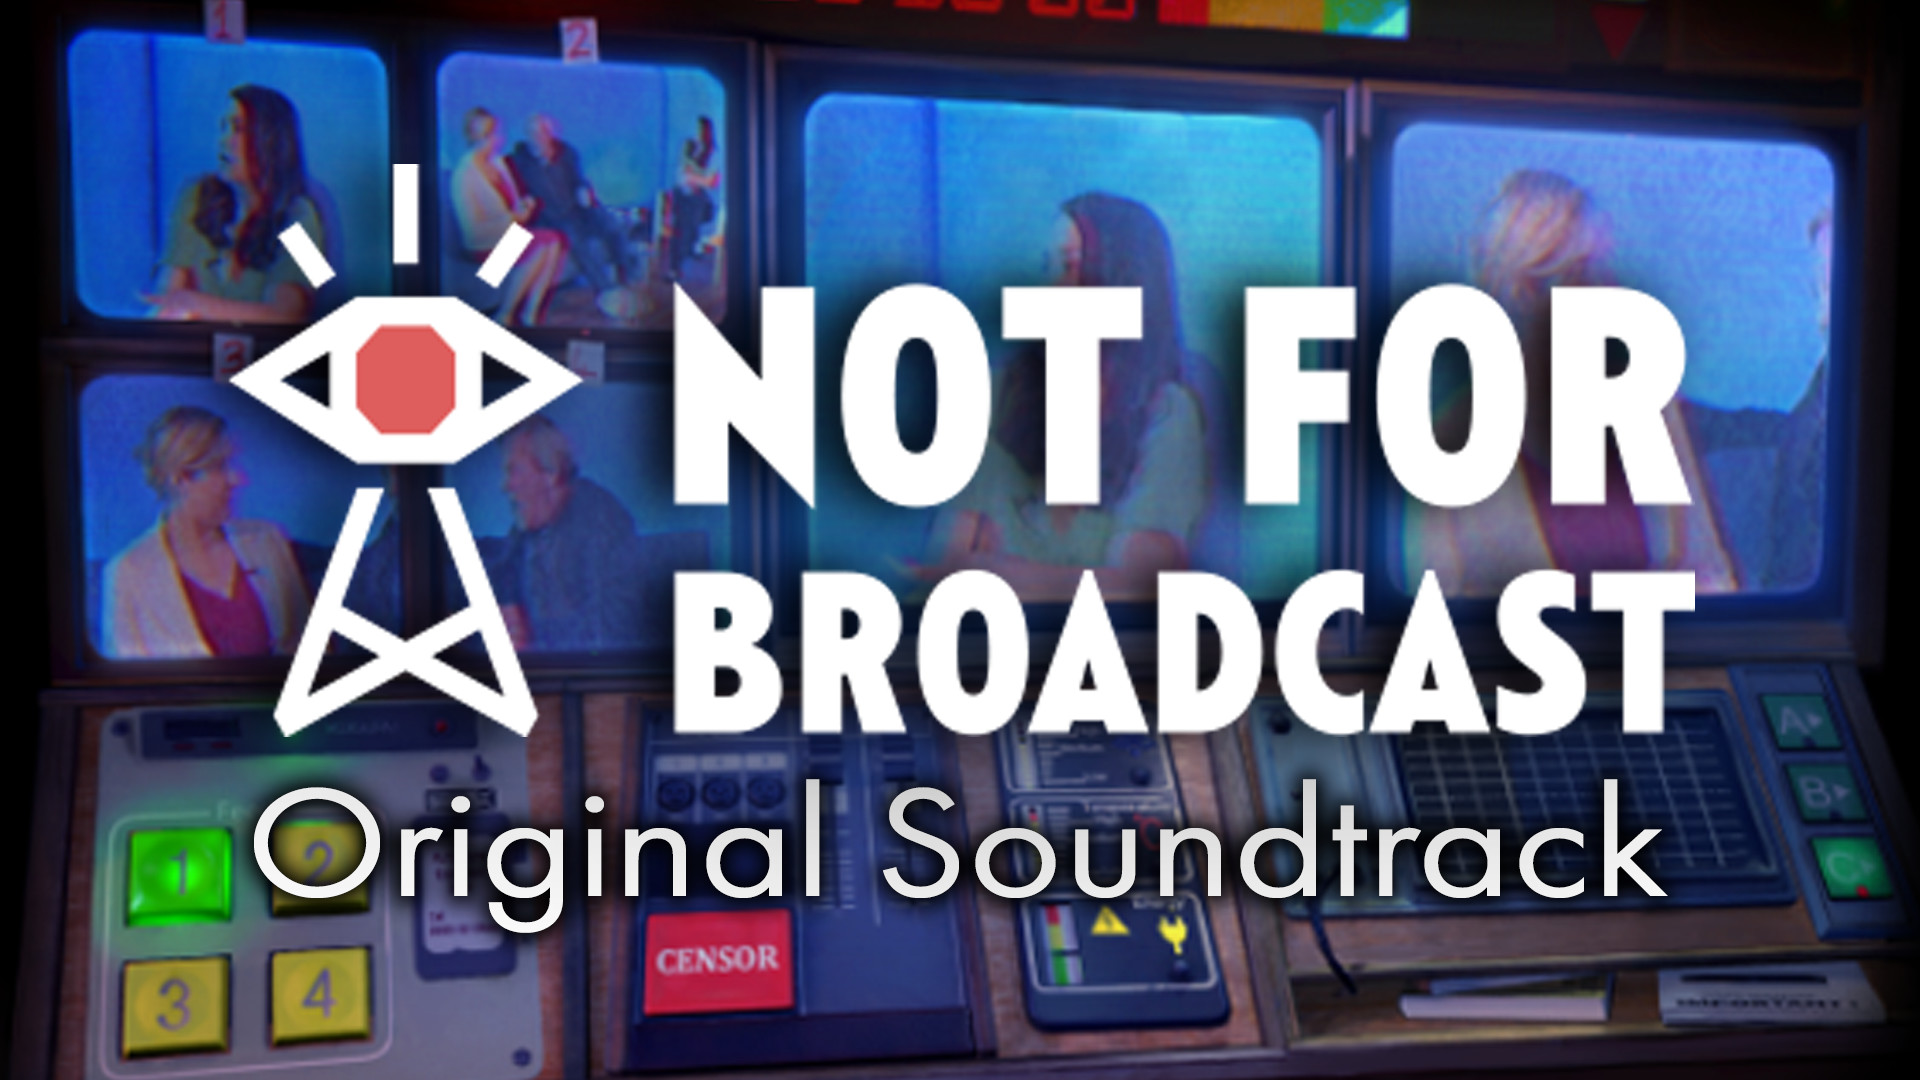 Not For Broadcast Soundtrack Featured Screenshot #1